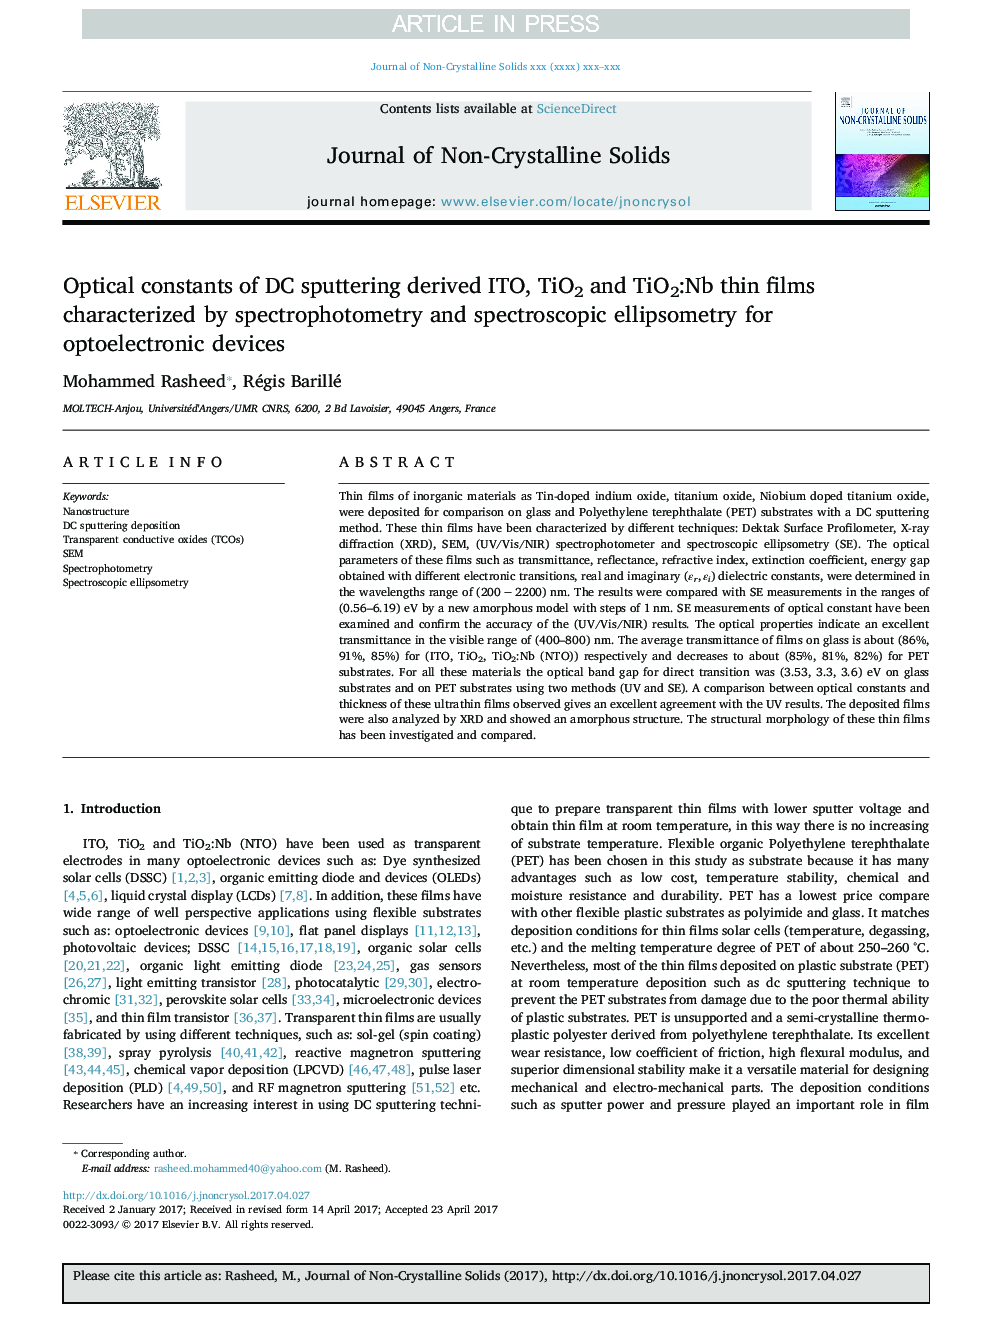 Optical constants of DC sputtering derived ITO, TiO2 and TiO2:Nb thin films characterized by spectrophotometry and spectroscopic ellipsometry for optoelectronic devices